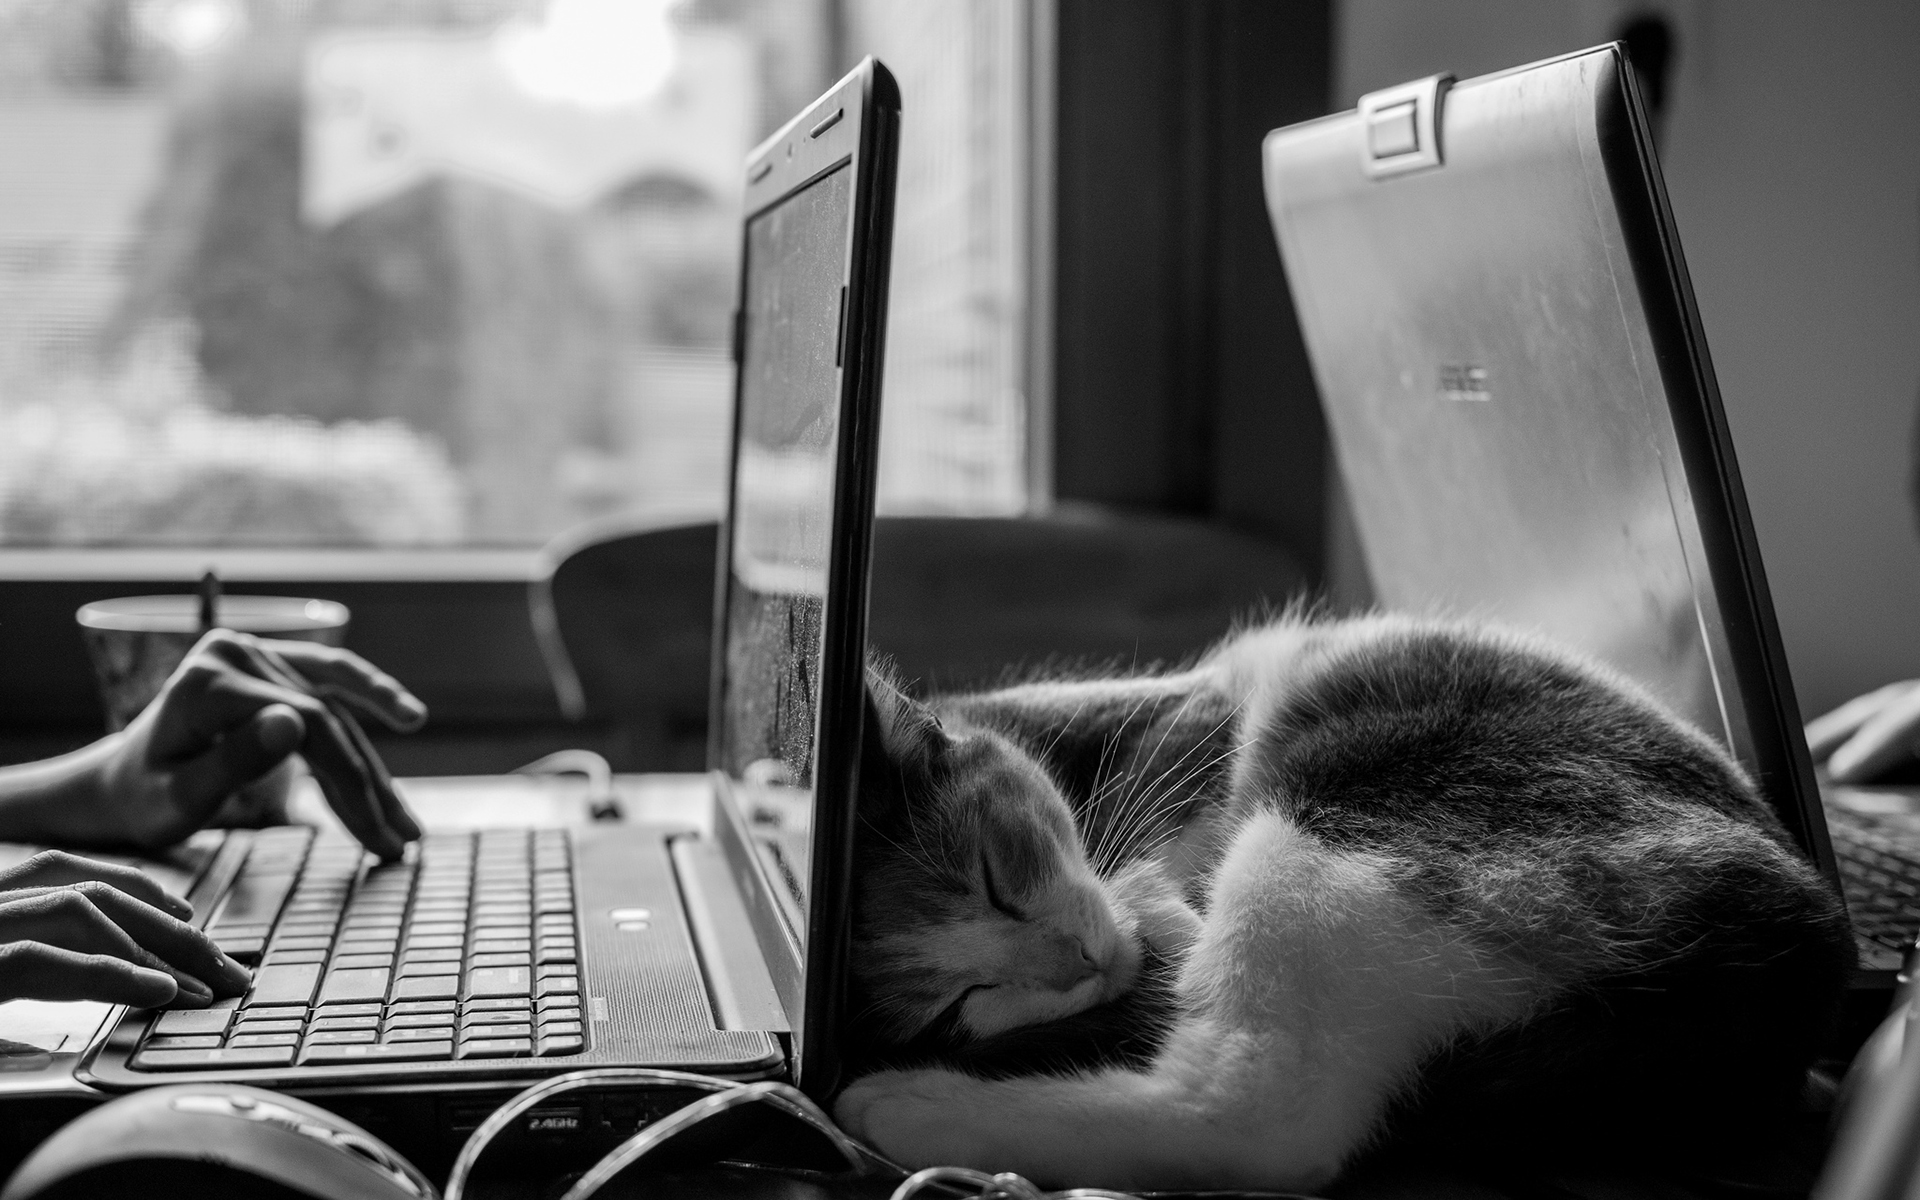 animals, Cats, Felines, Fur, Face, Whiskers, Black, White, Bw, Humor, Funny, Sleep, Tech, Computers, Window, Situation, Cute, People, Keyboard, Light Wallpaper